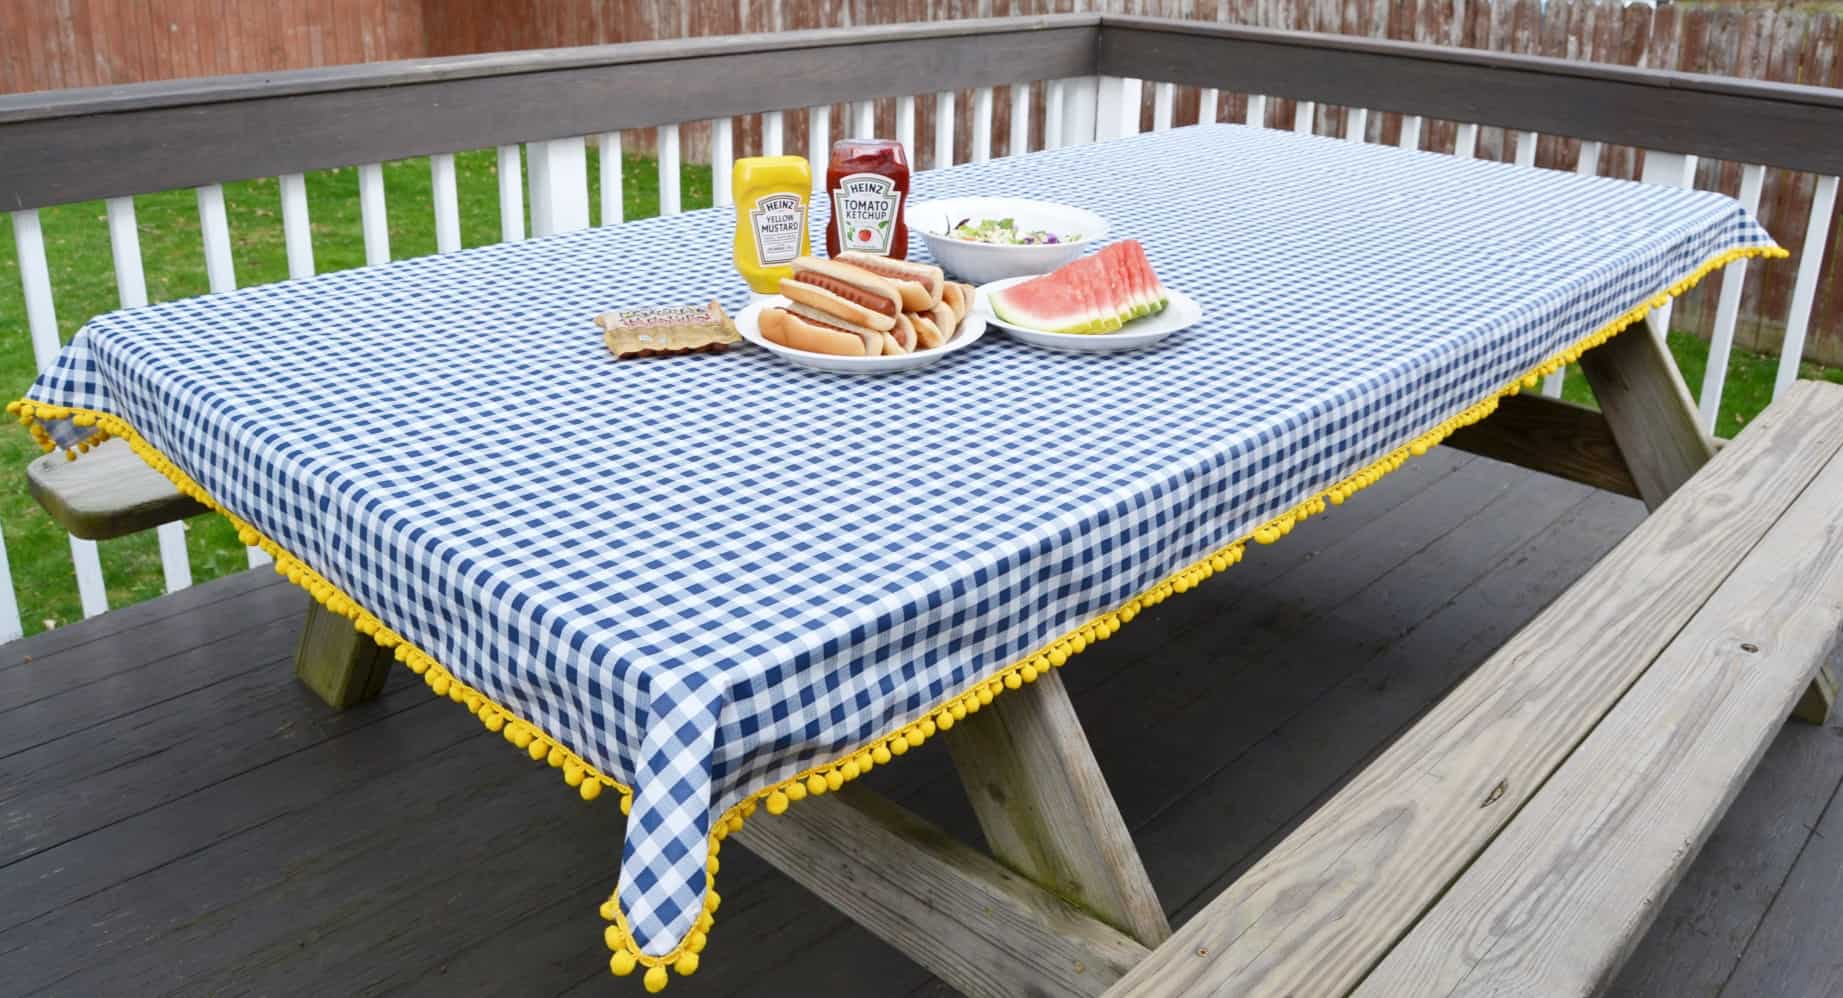 How To Make A Tablecloth Without Sewing